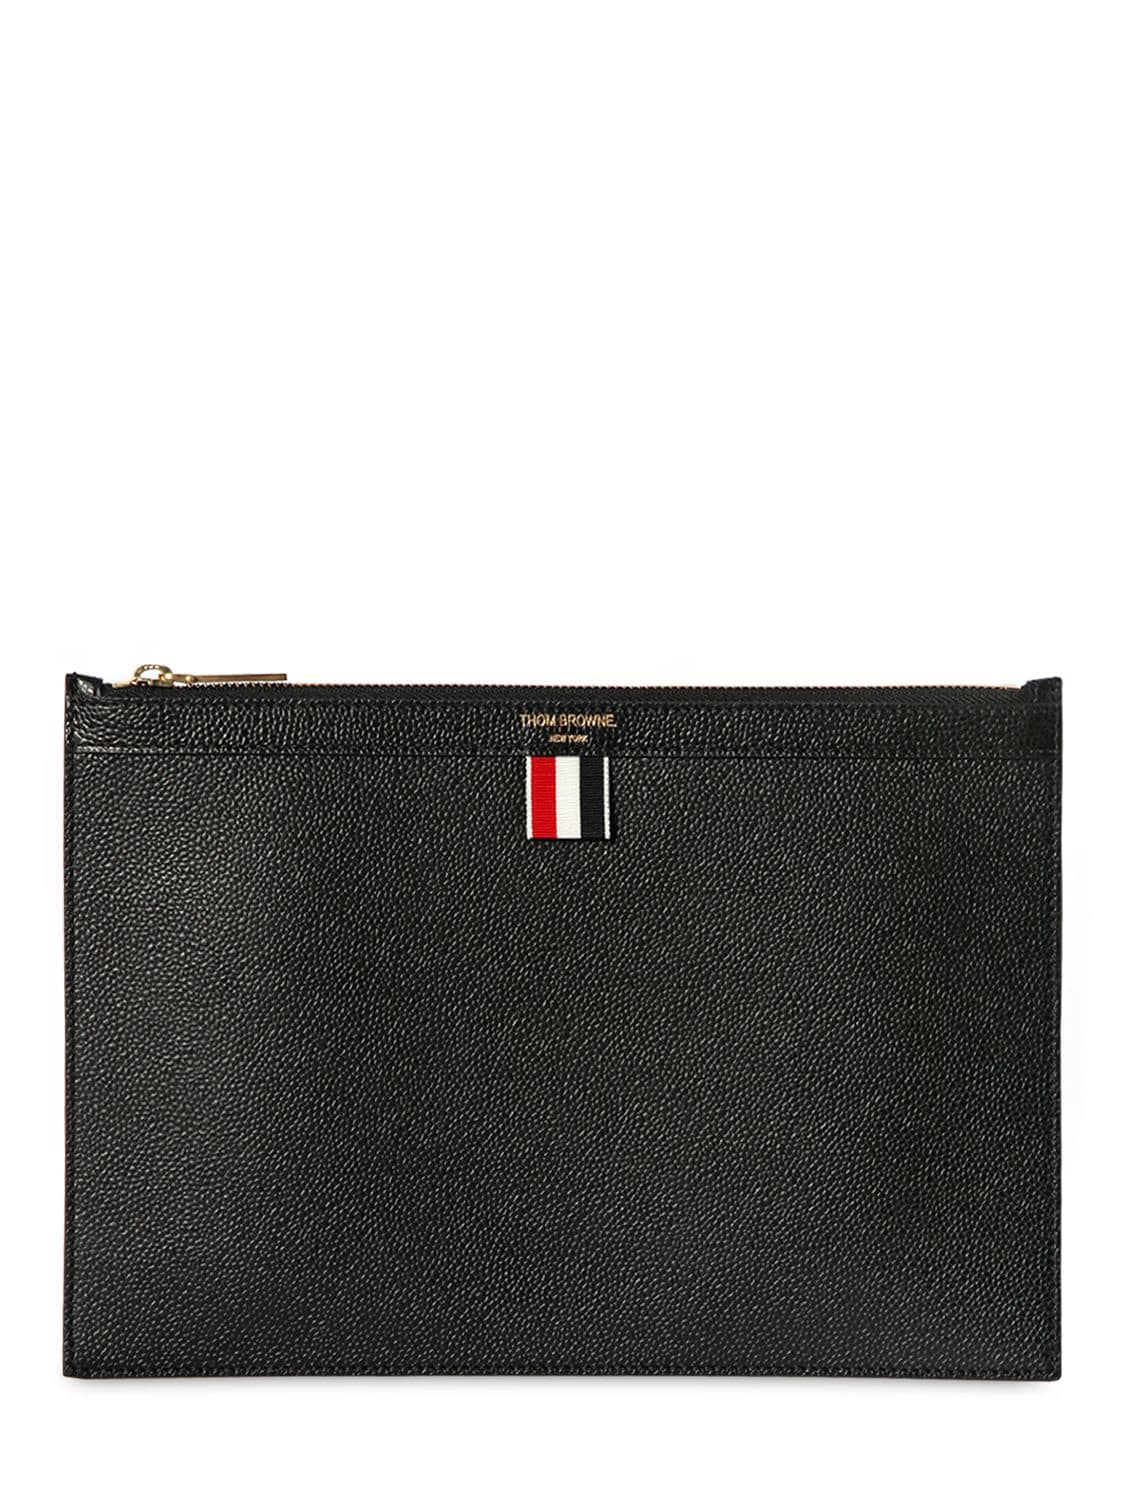 Image of Medium Pebbled Leather Zip Pouch